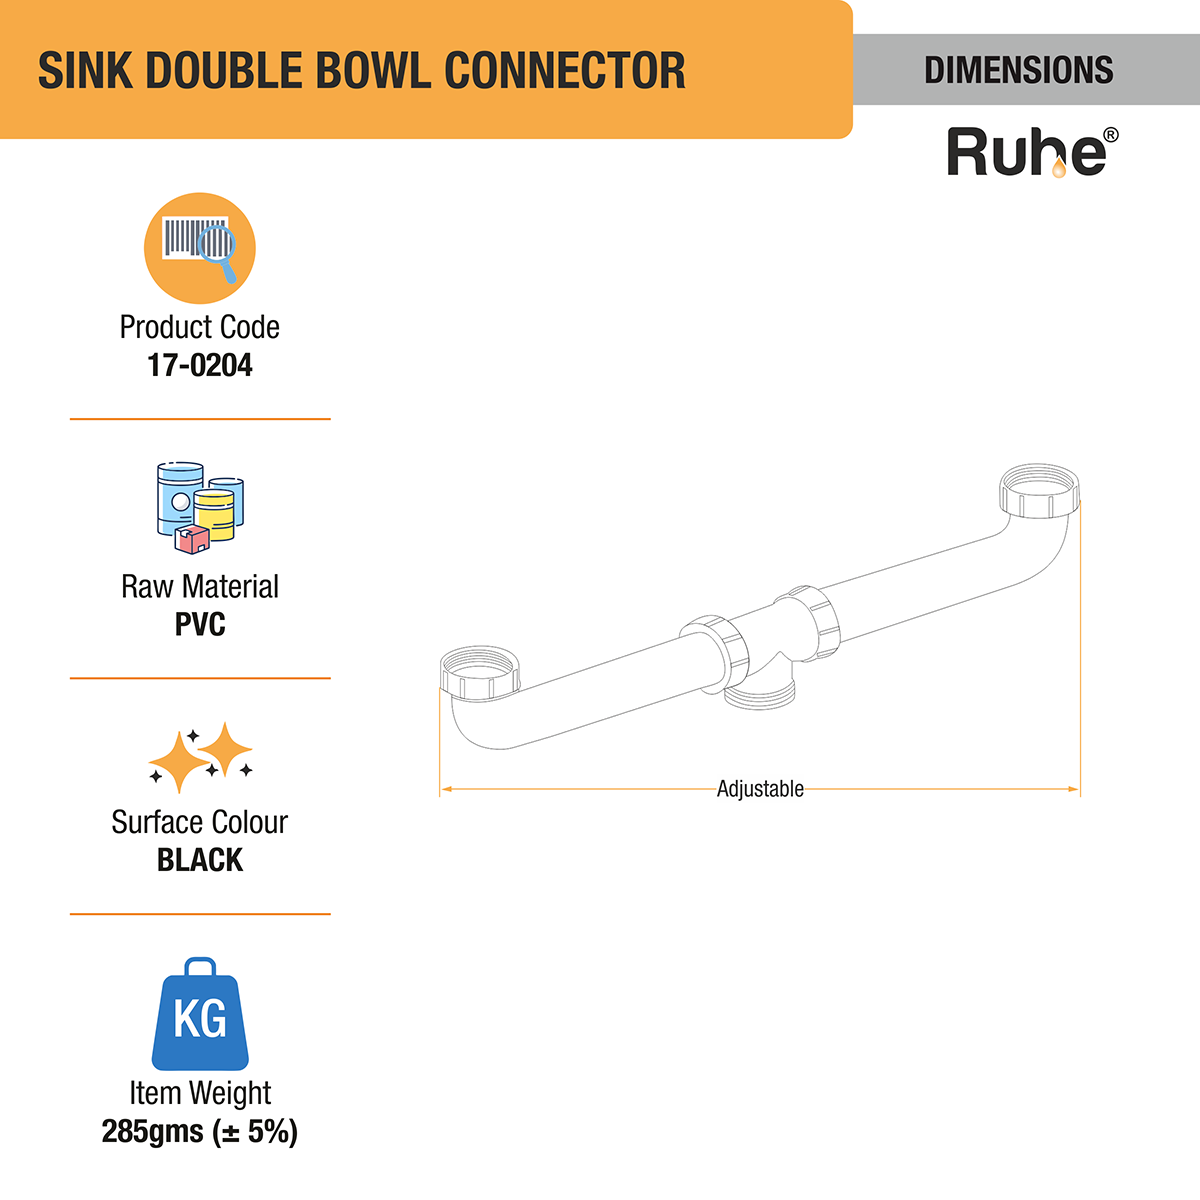 Double Bowl Connector dimensions and sizes